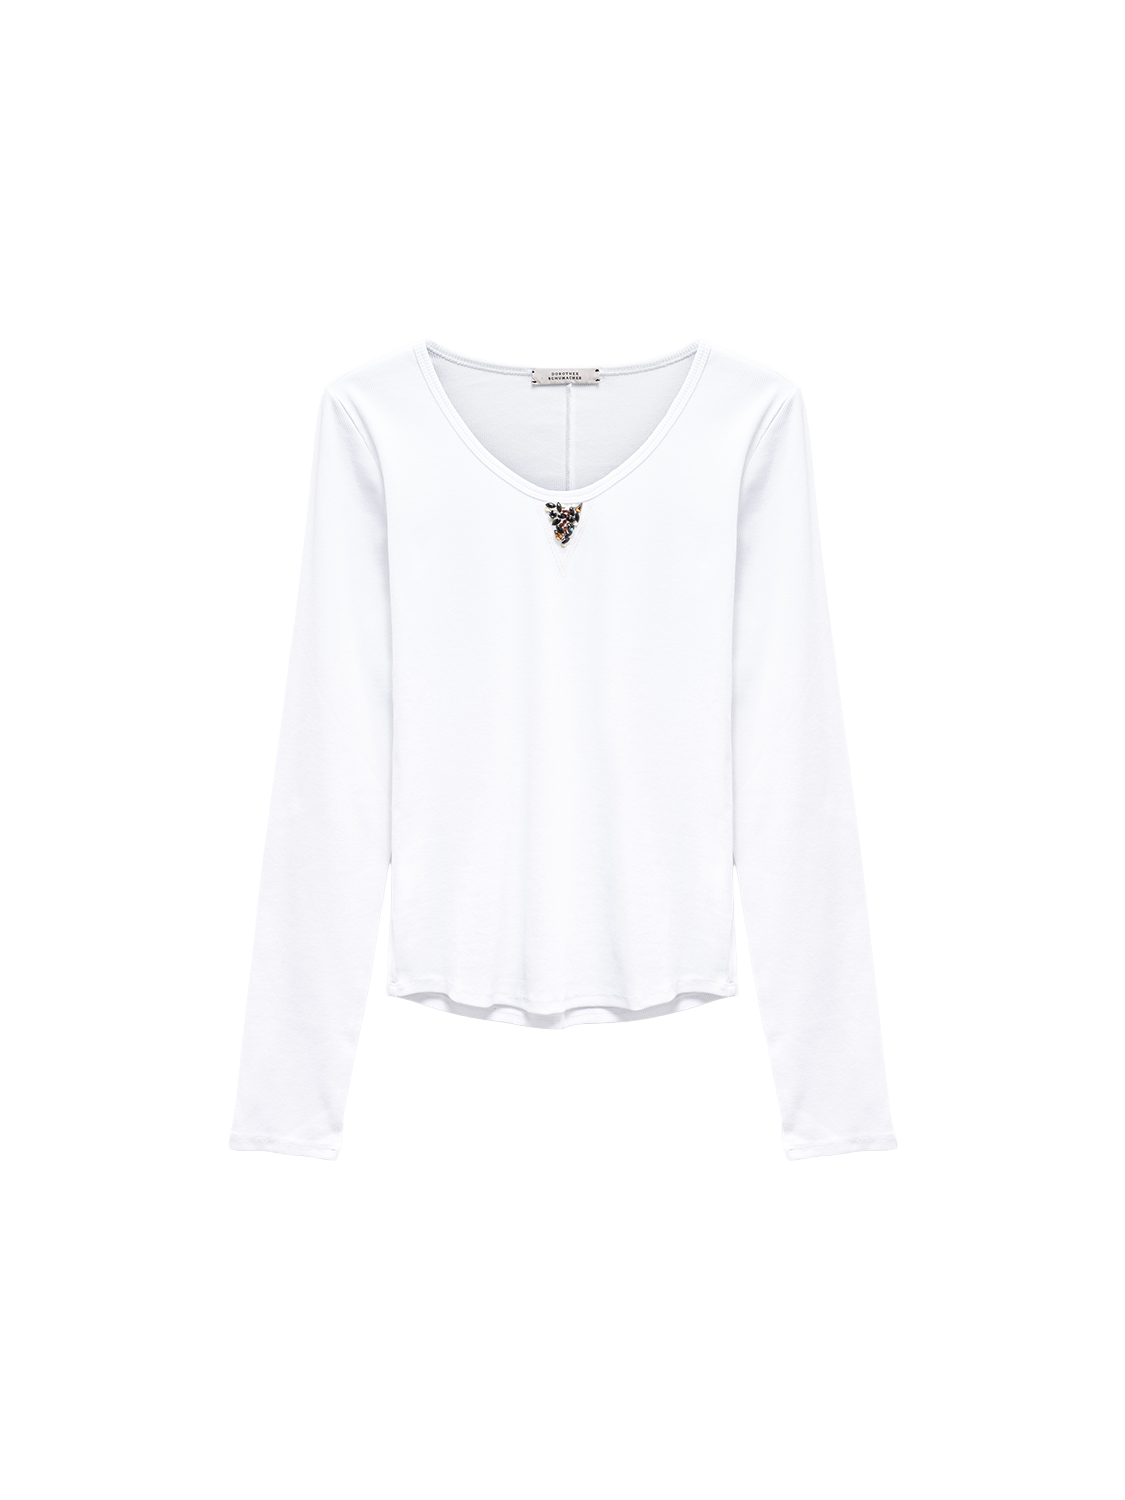 Dorothee Schumacher Shades of Color rib knit shirt  white XS